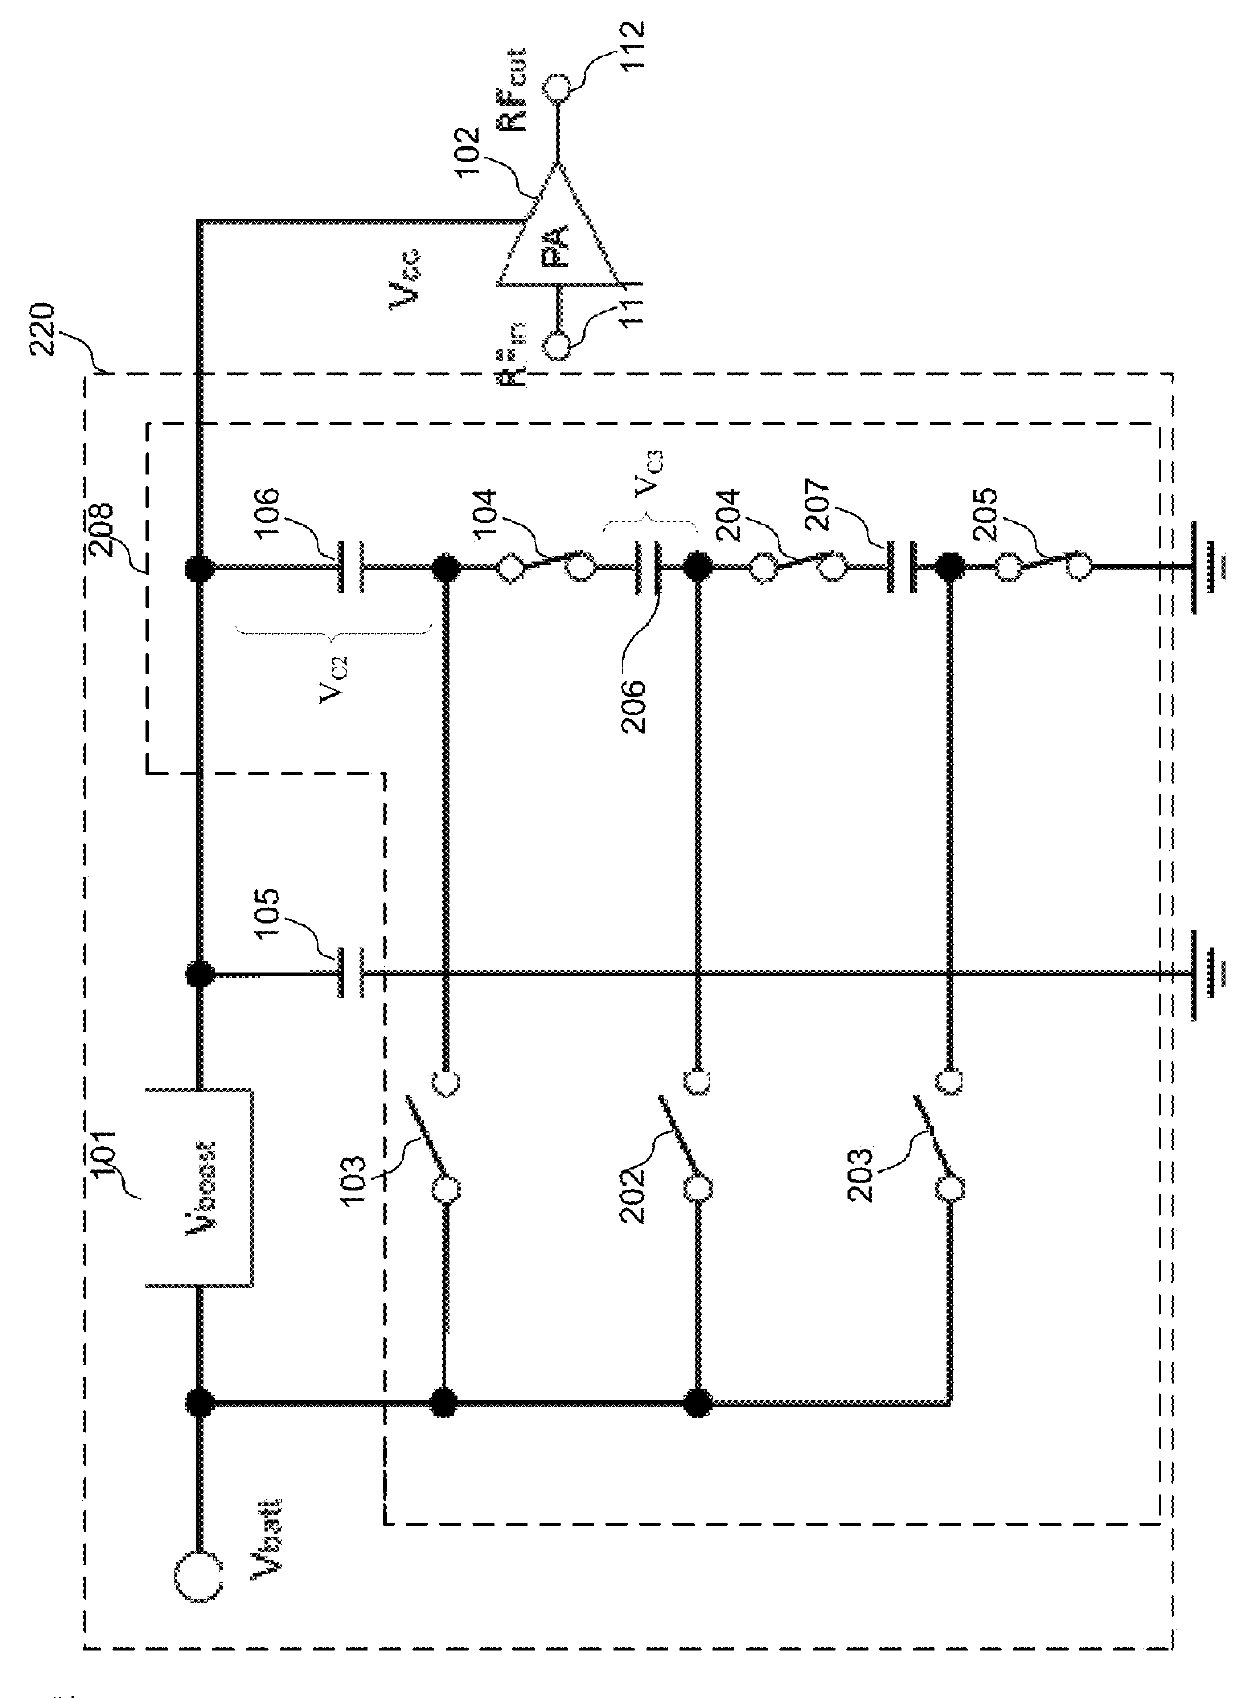 Adaptive Envelope Tracking for Biasing Radio Frequency Power Amplifiers